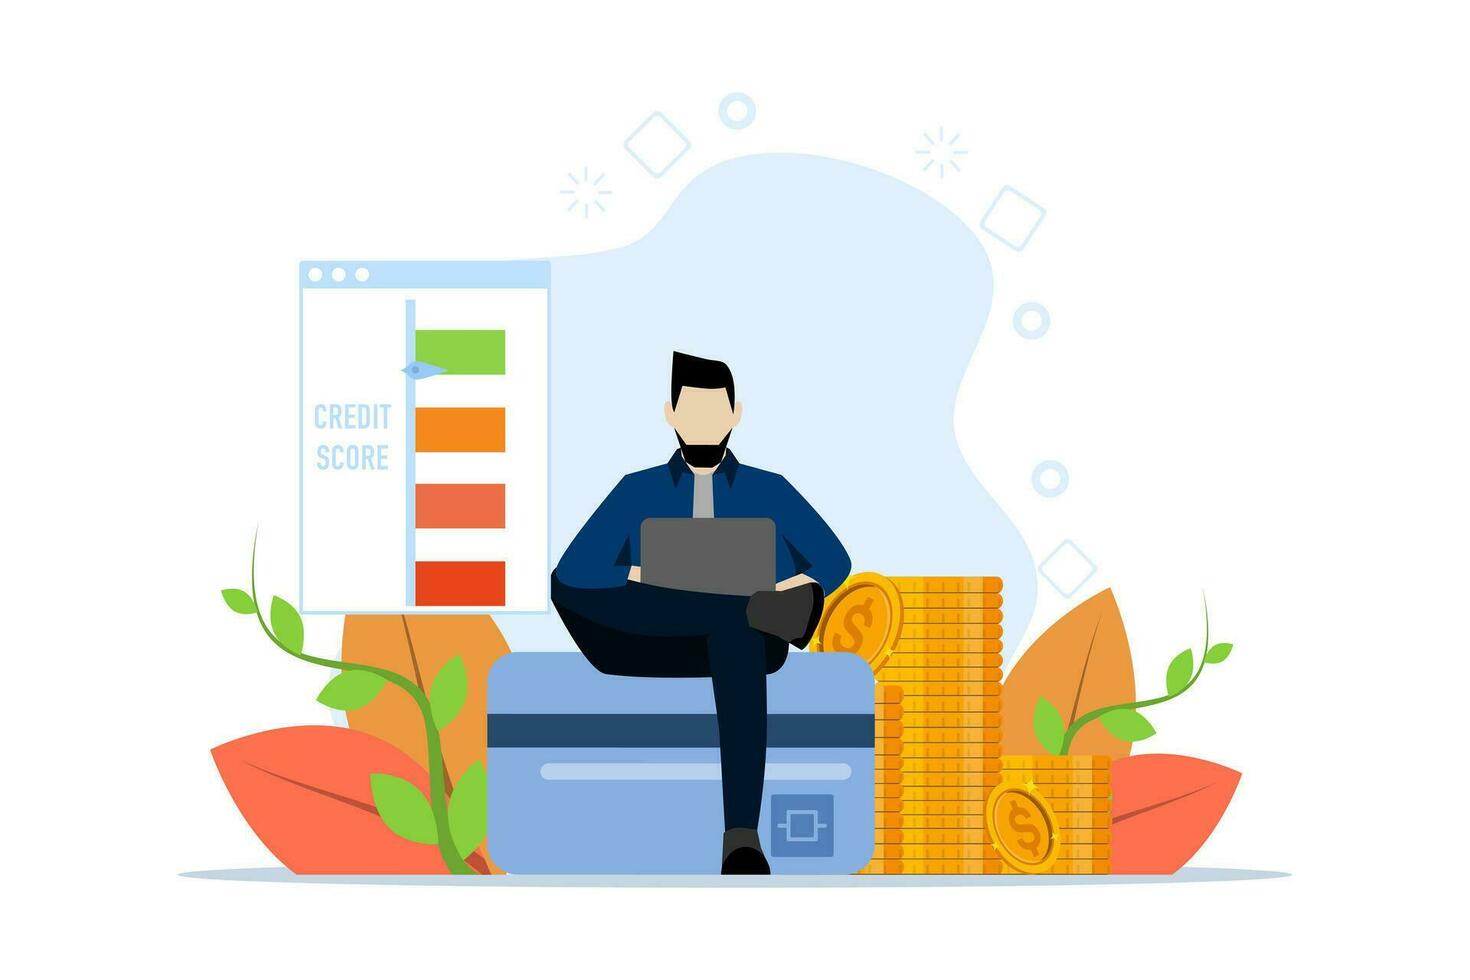 man sitting with laptop and checking credit score. Concept of bank, spending money, credit report, mortgage, payment history, cash. Vector illustration in flat design.